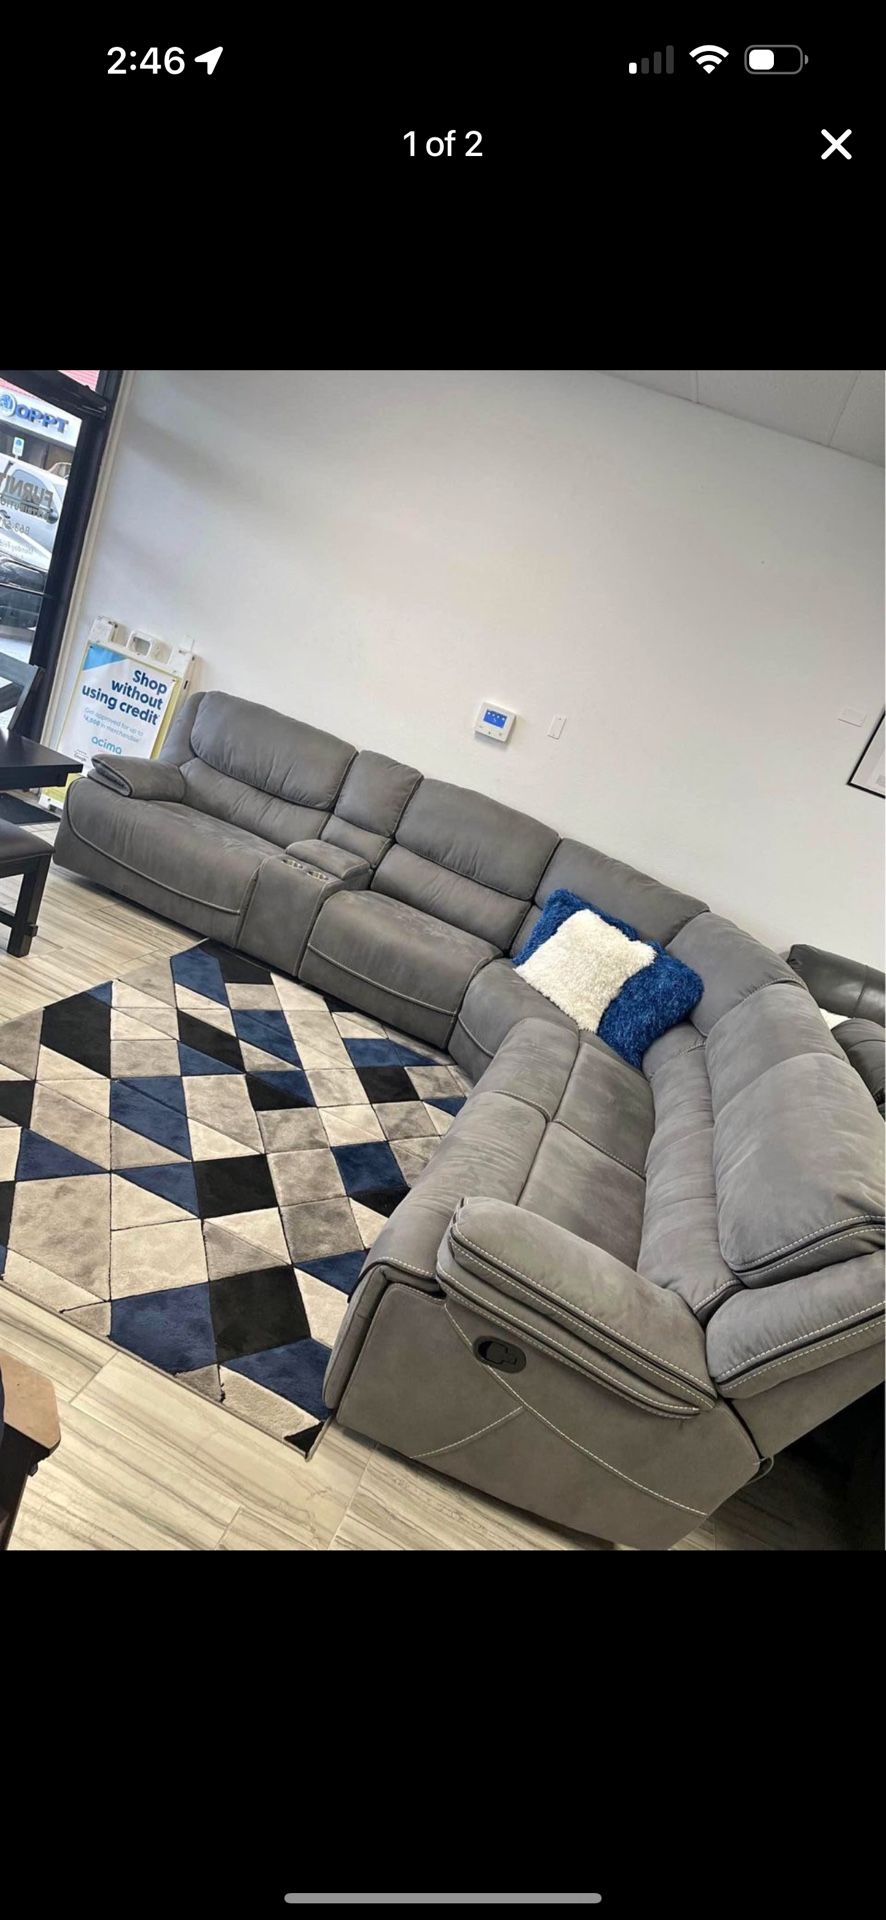 BEAUTIFUL GRAY ALEJANDRA SECTIONAL SOFA!$1199!*SAME DAY DELIVERY*NO CREDIT NEEDED*EASY FINANCING*HUGE SALE*